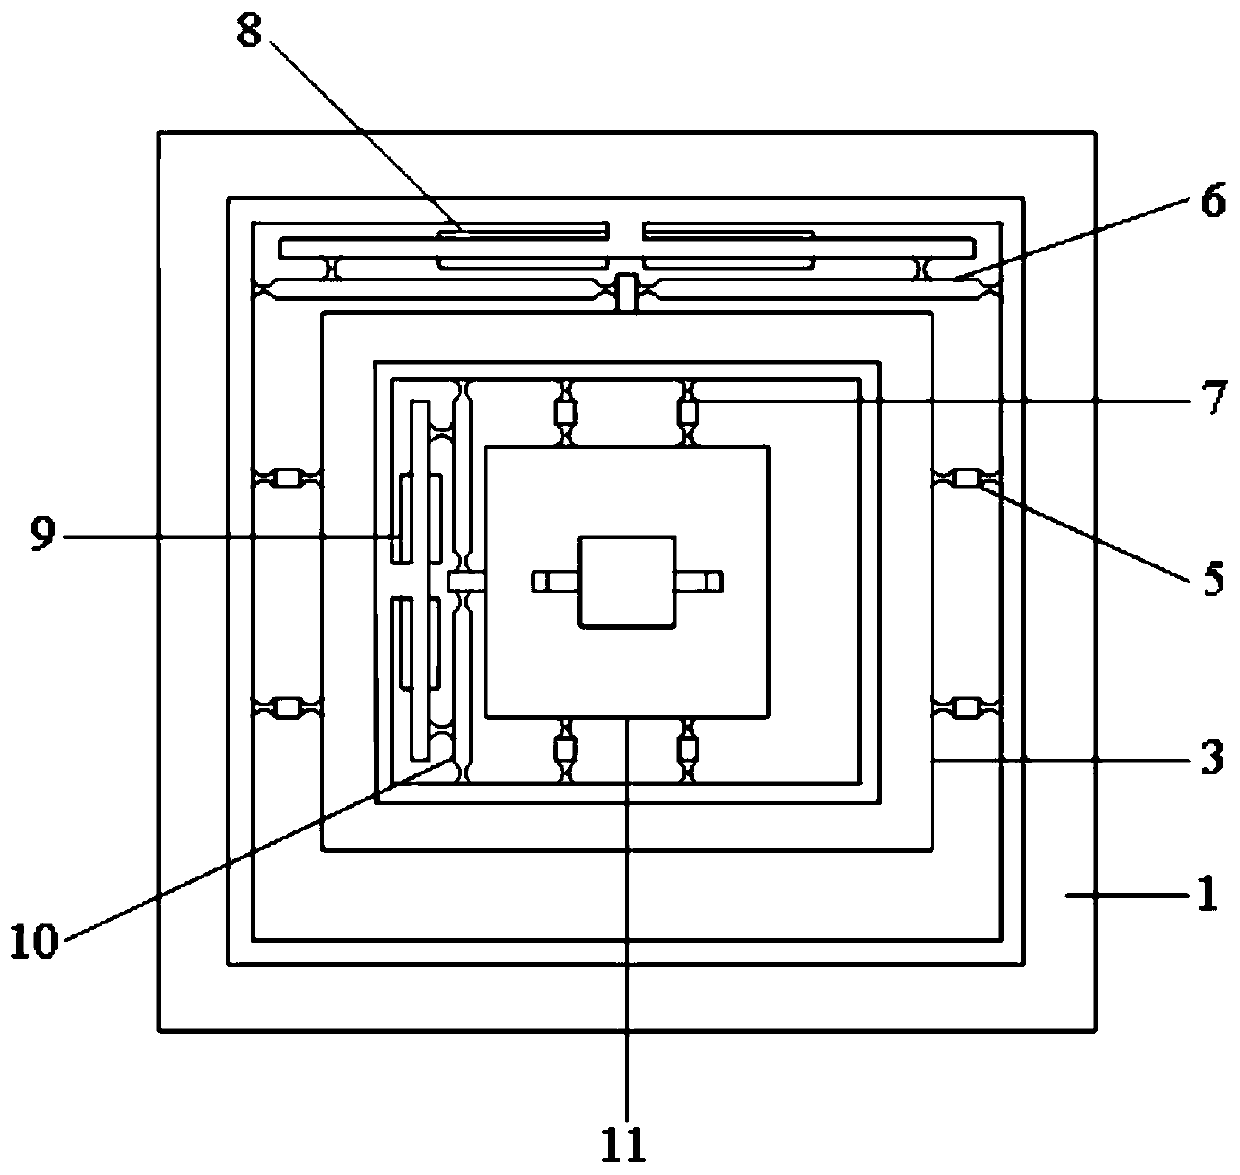 A three-dimensional piezoelectric driven micromirror adjustment device